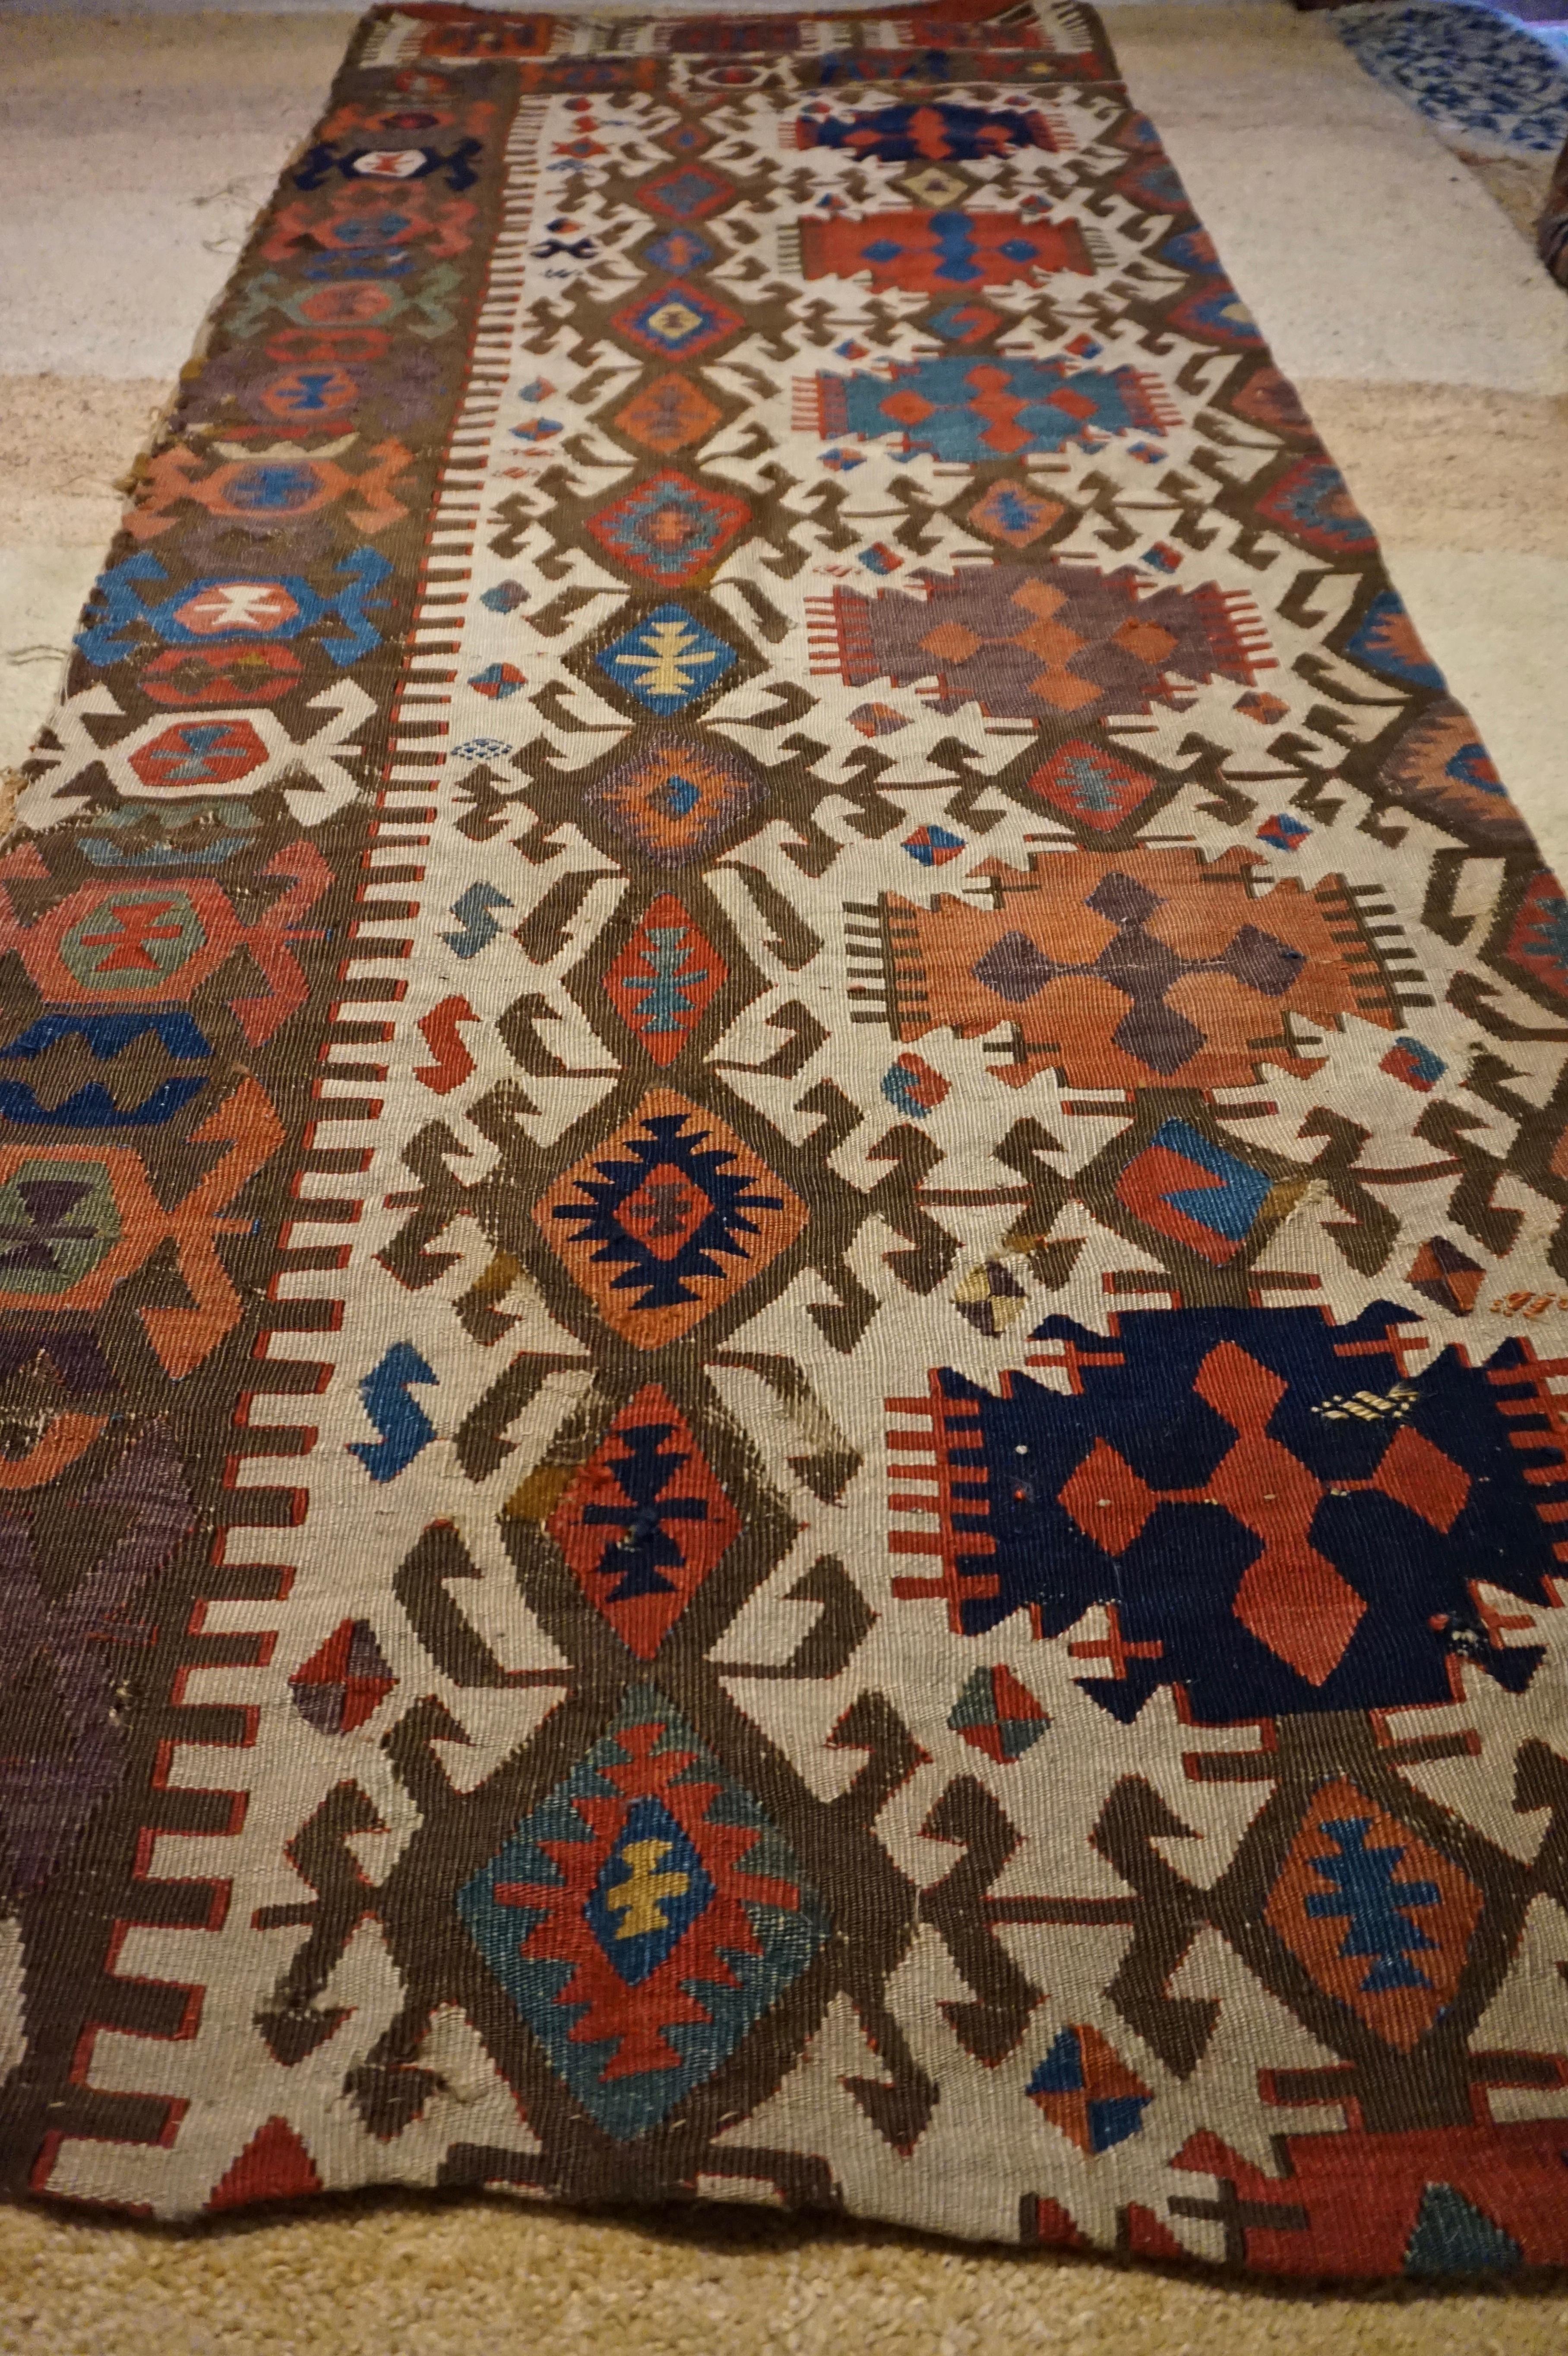 Antique Caucasus Sumak/Kilim panel finely hand knotted in natural dyes. Captivating pattern and warm hues. Some wear on edges but overall respectable condition for age.